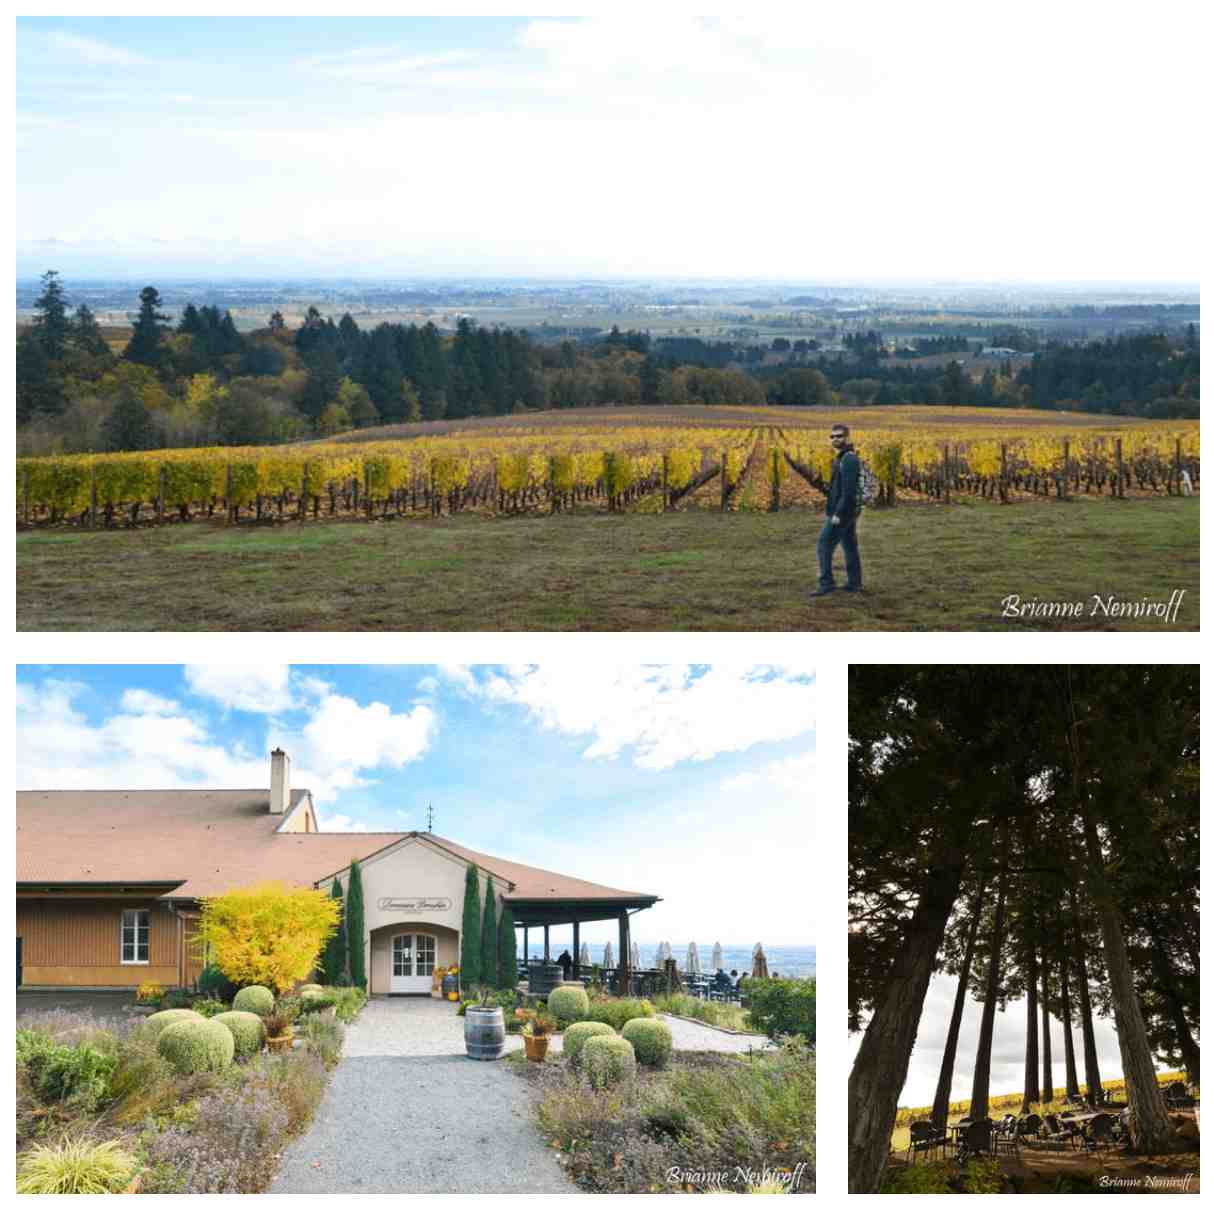 A Weekend Guide to Willamette Valley Wine Country - Domaine Drouhin